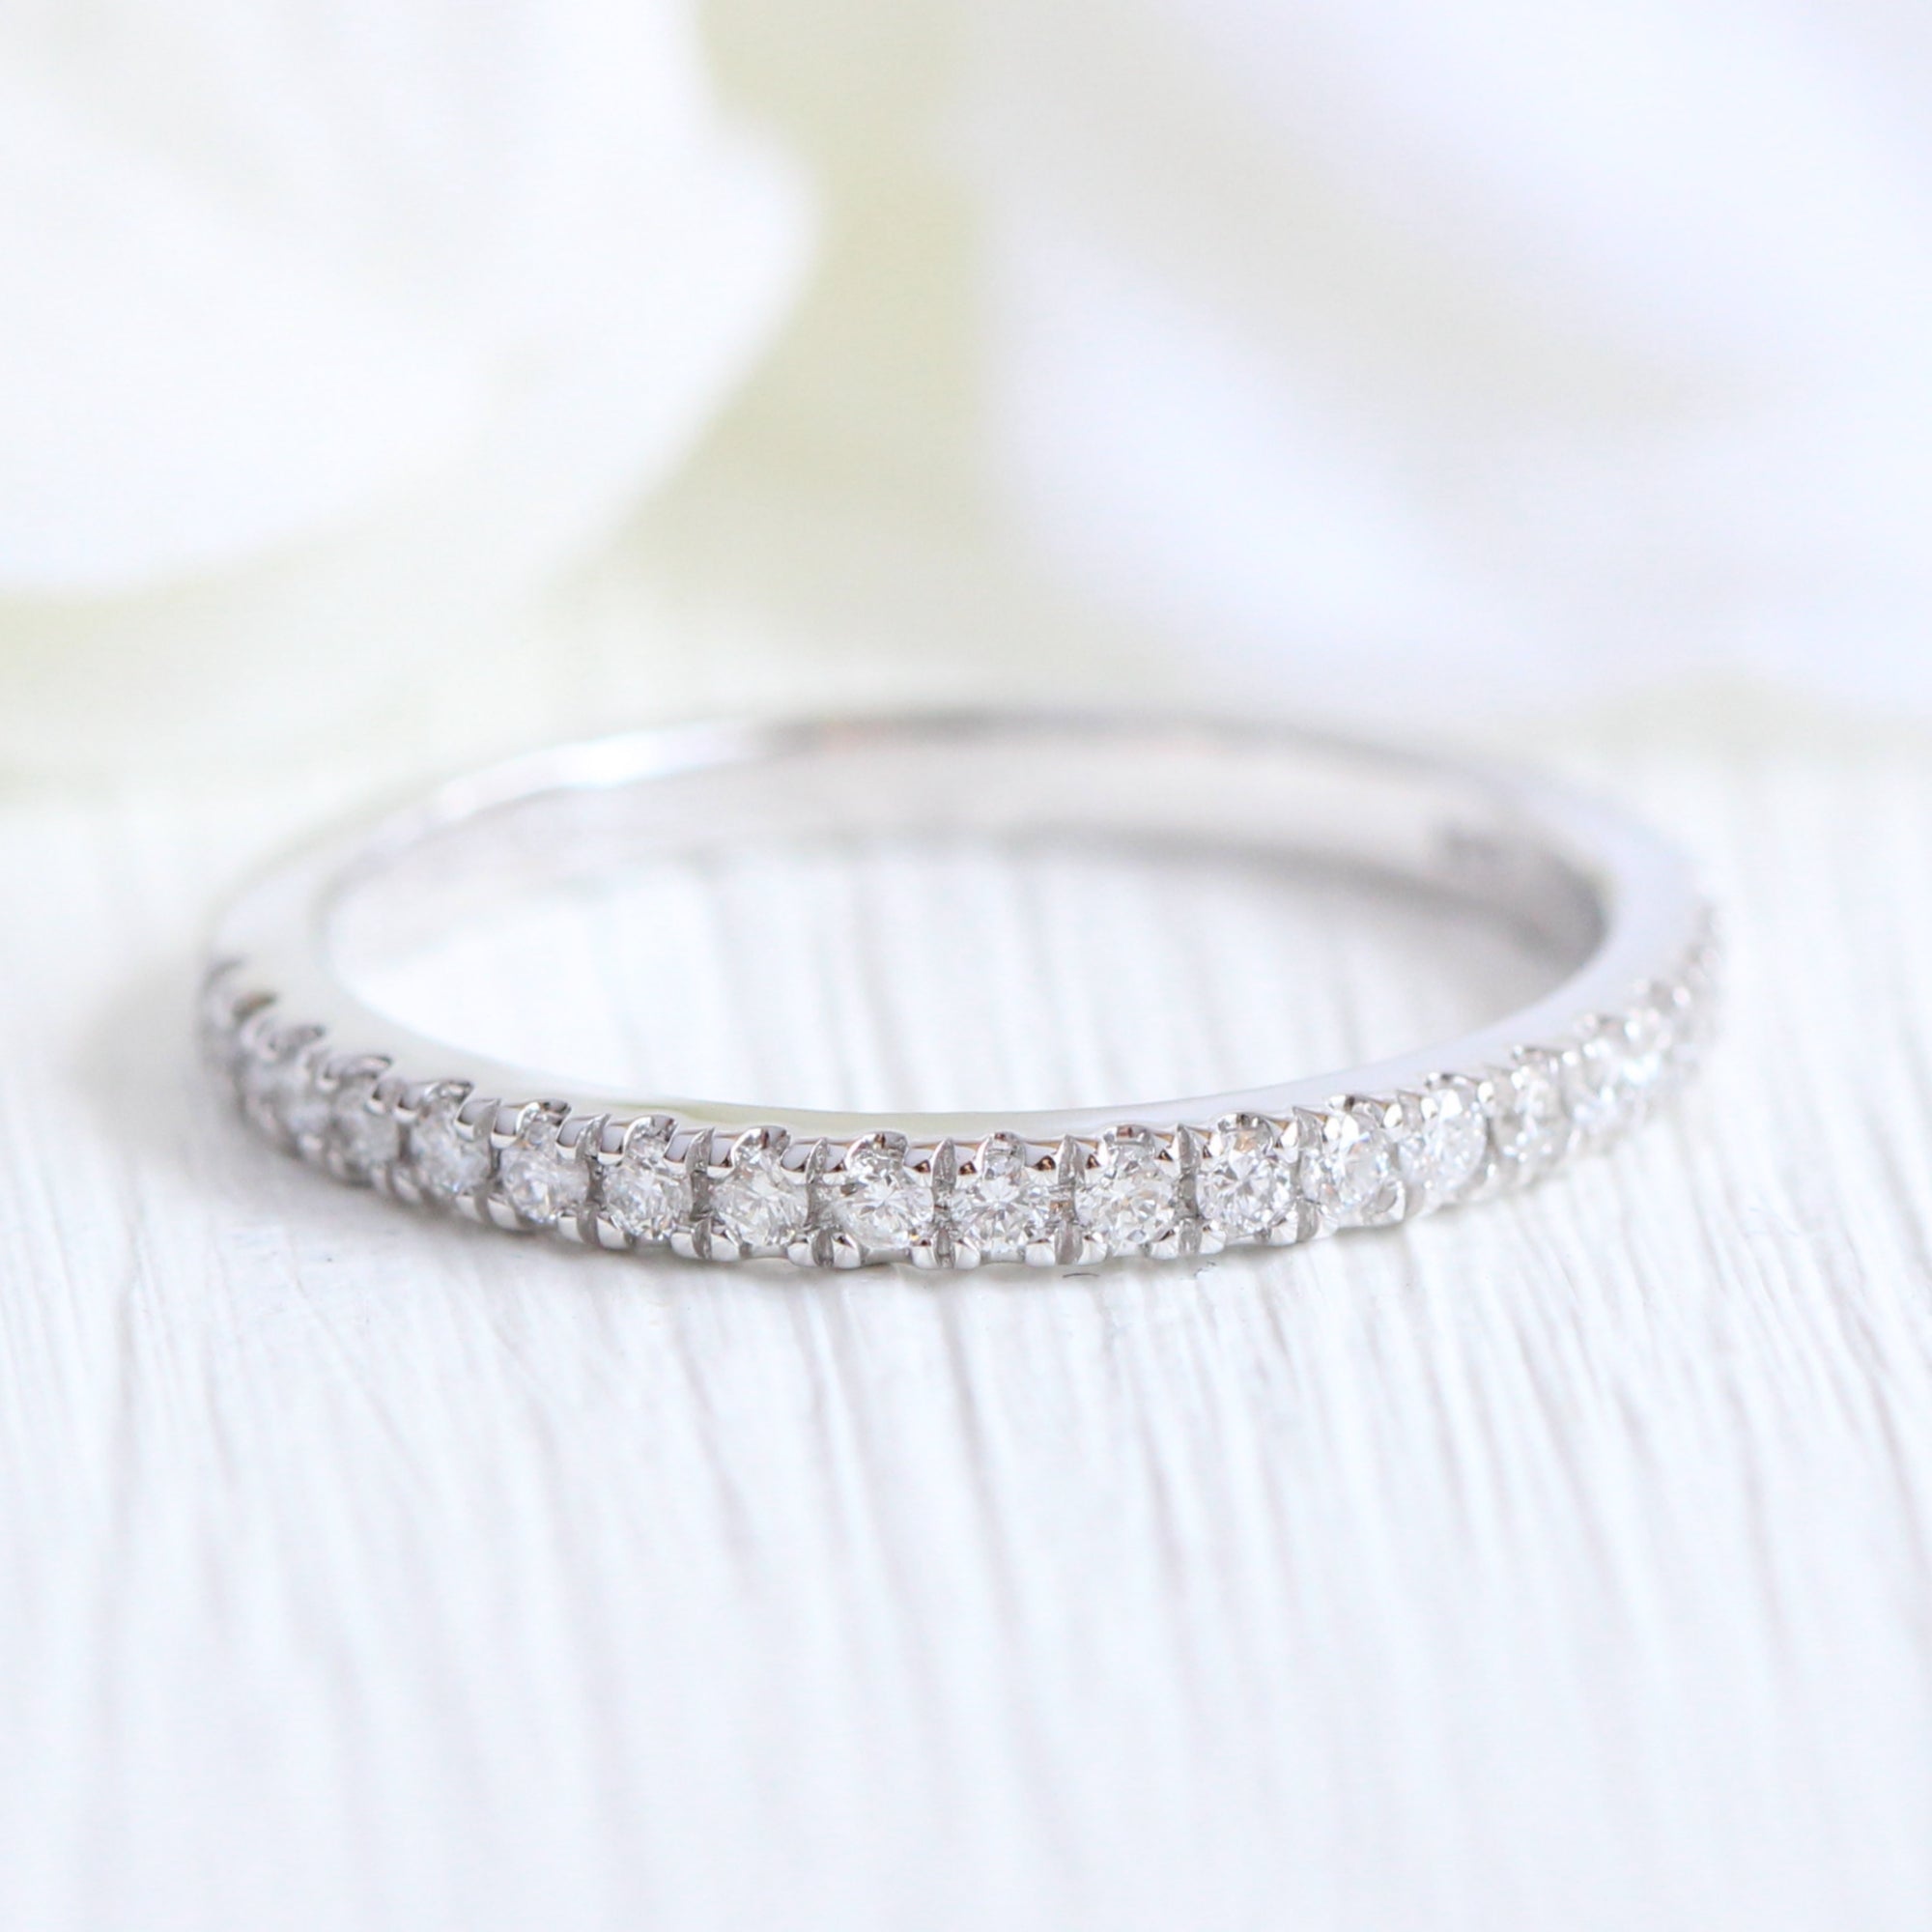 Eternity wedding band, white gold and diamonds - Categories